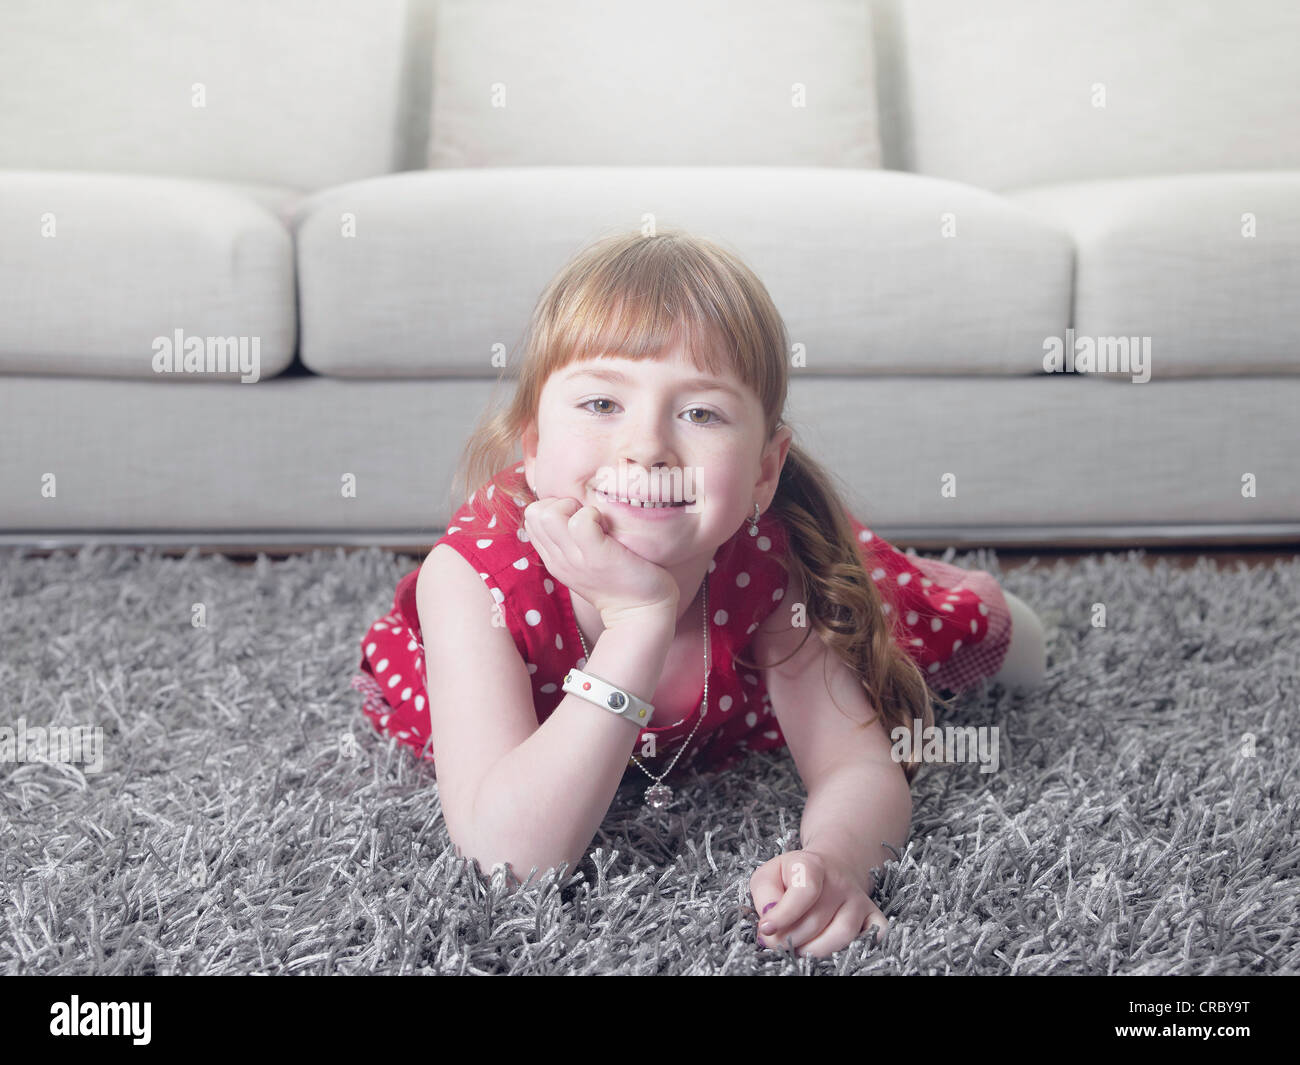 Smiling girl laying on rug Banque D'Images